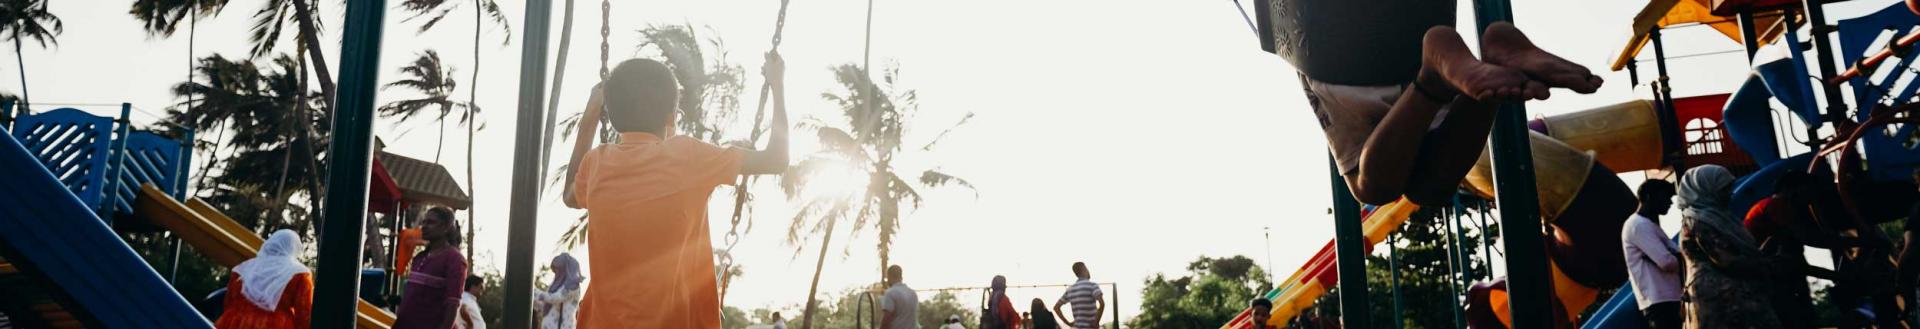 A cropped image of children on a playground with palm trees